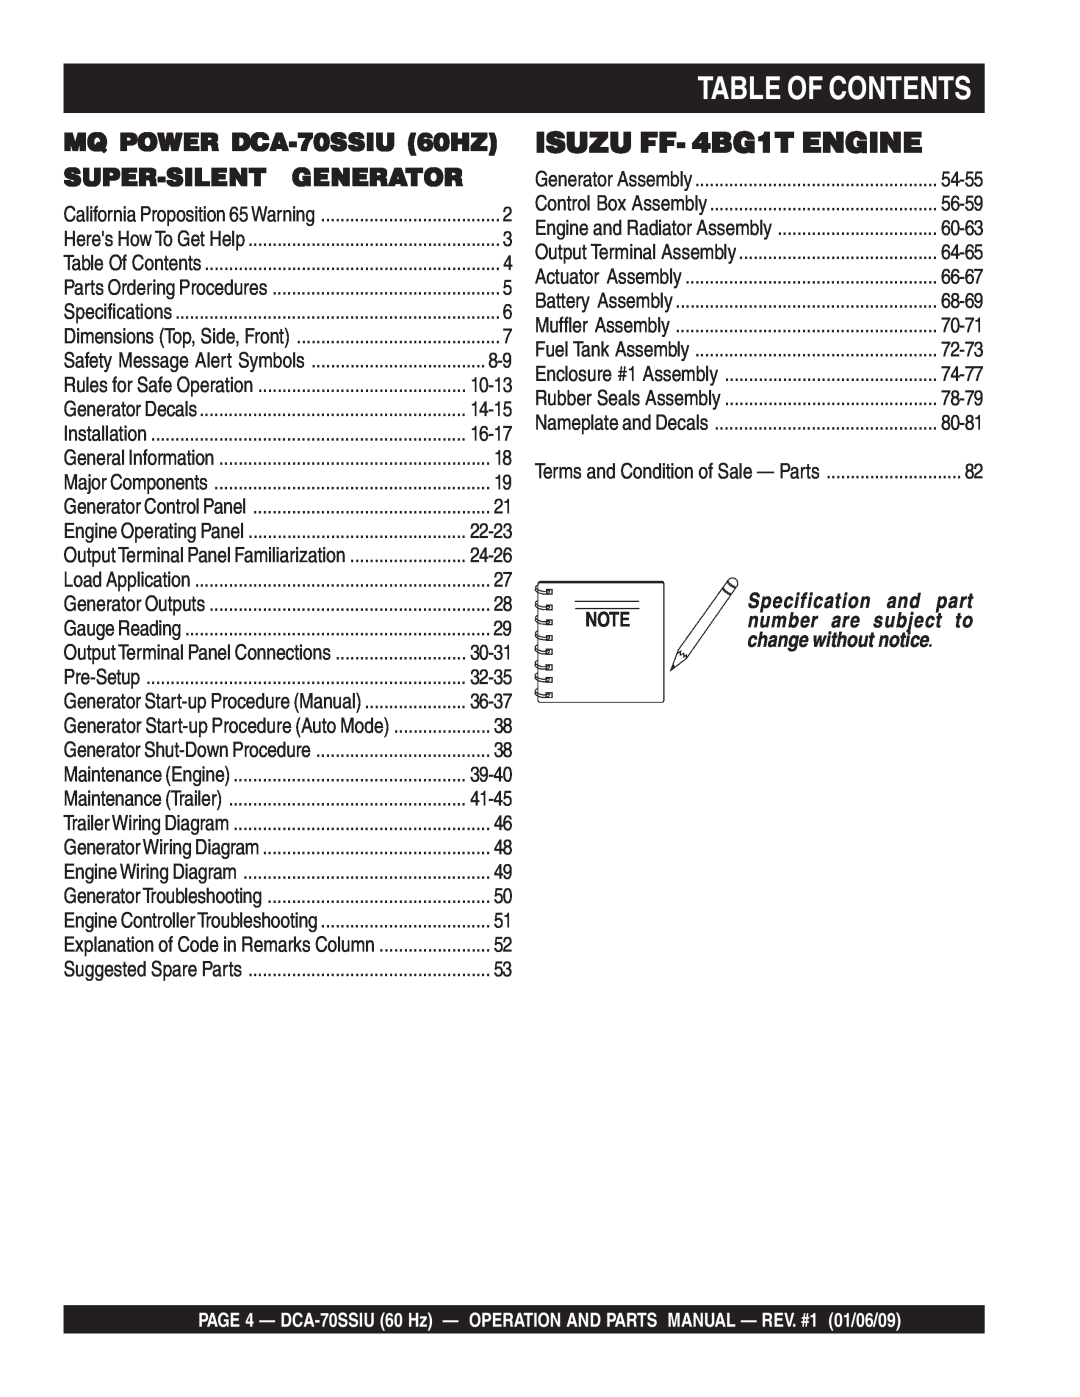 Multiquip M2870300504 operation manual Table Of Contents, ISUZU FF- 4BG1T ENGINE, Specification and part 